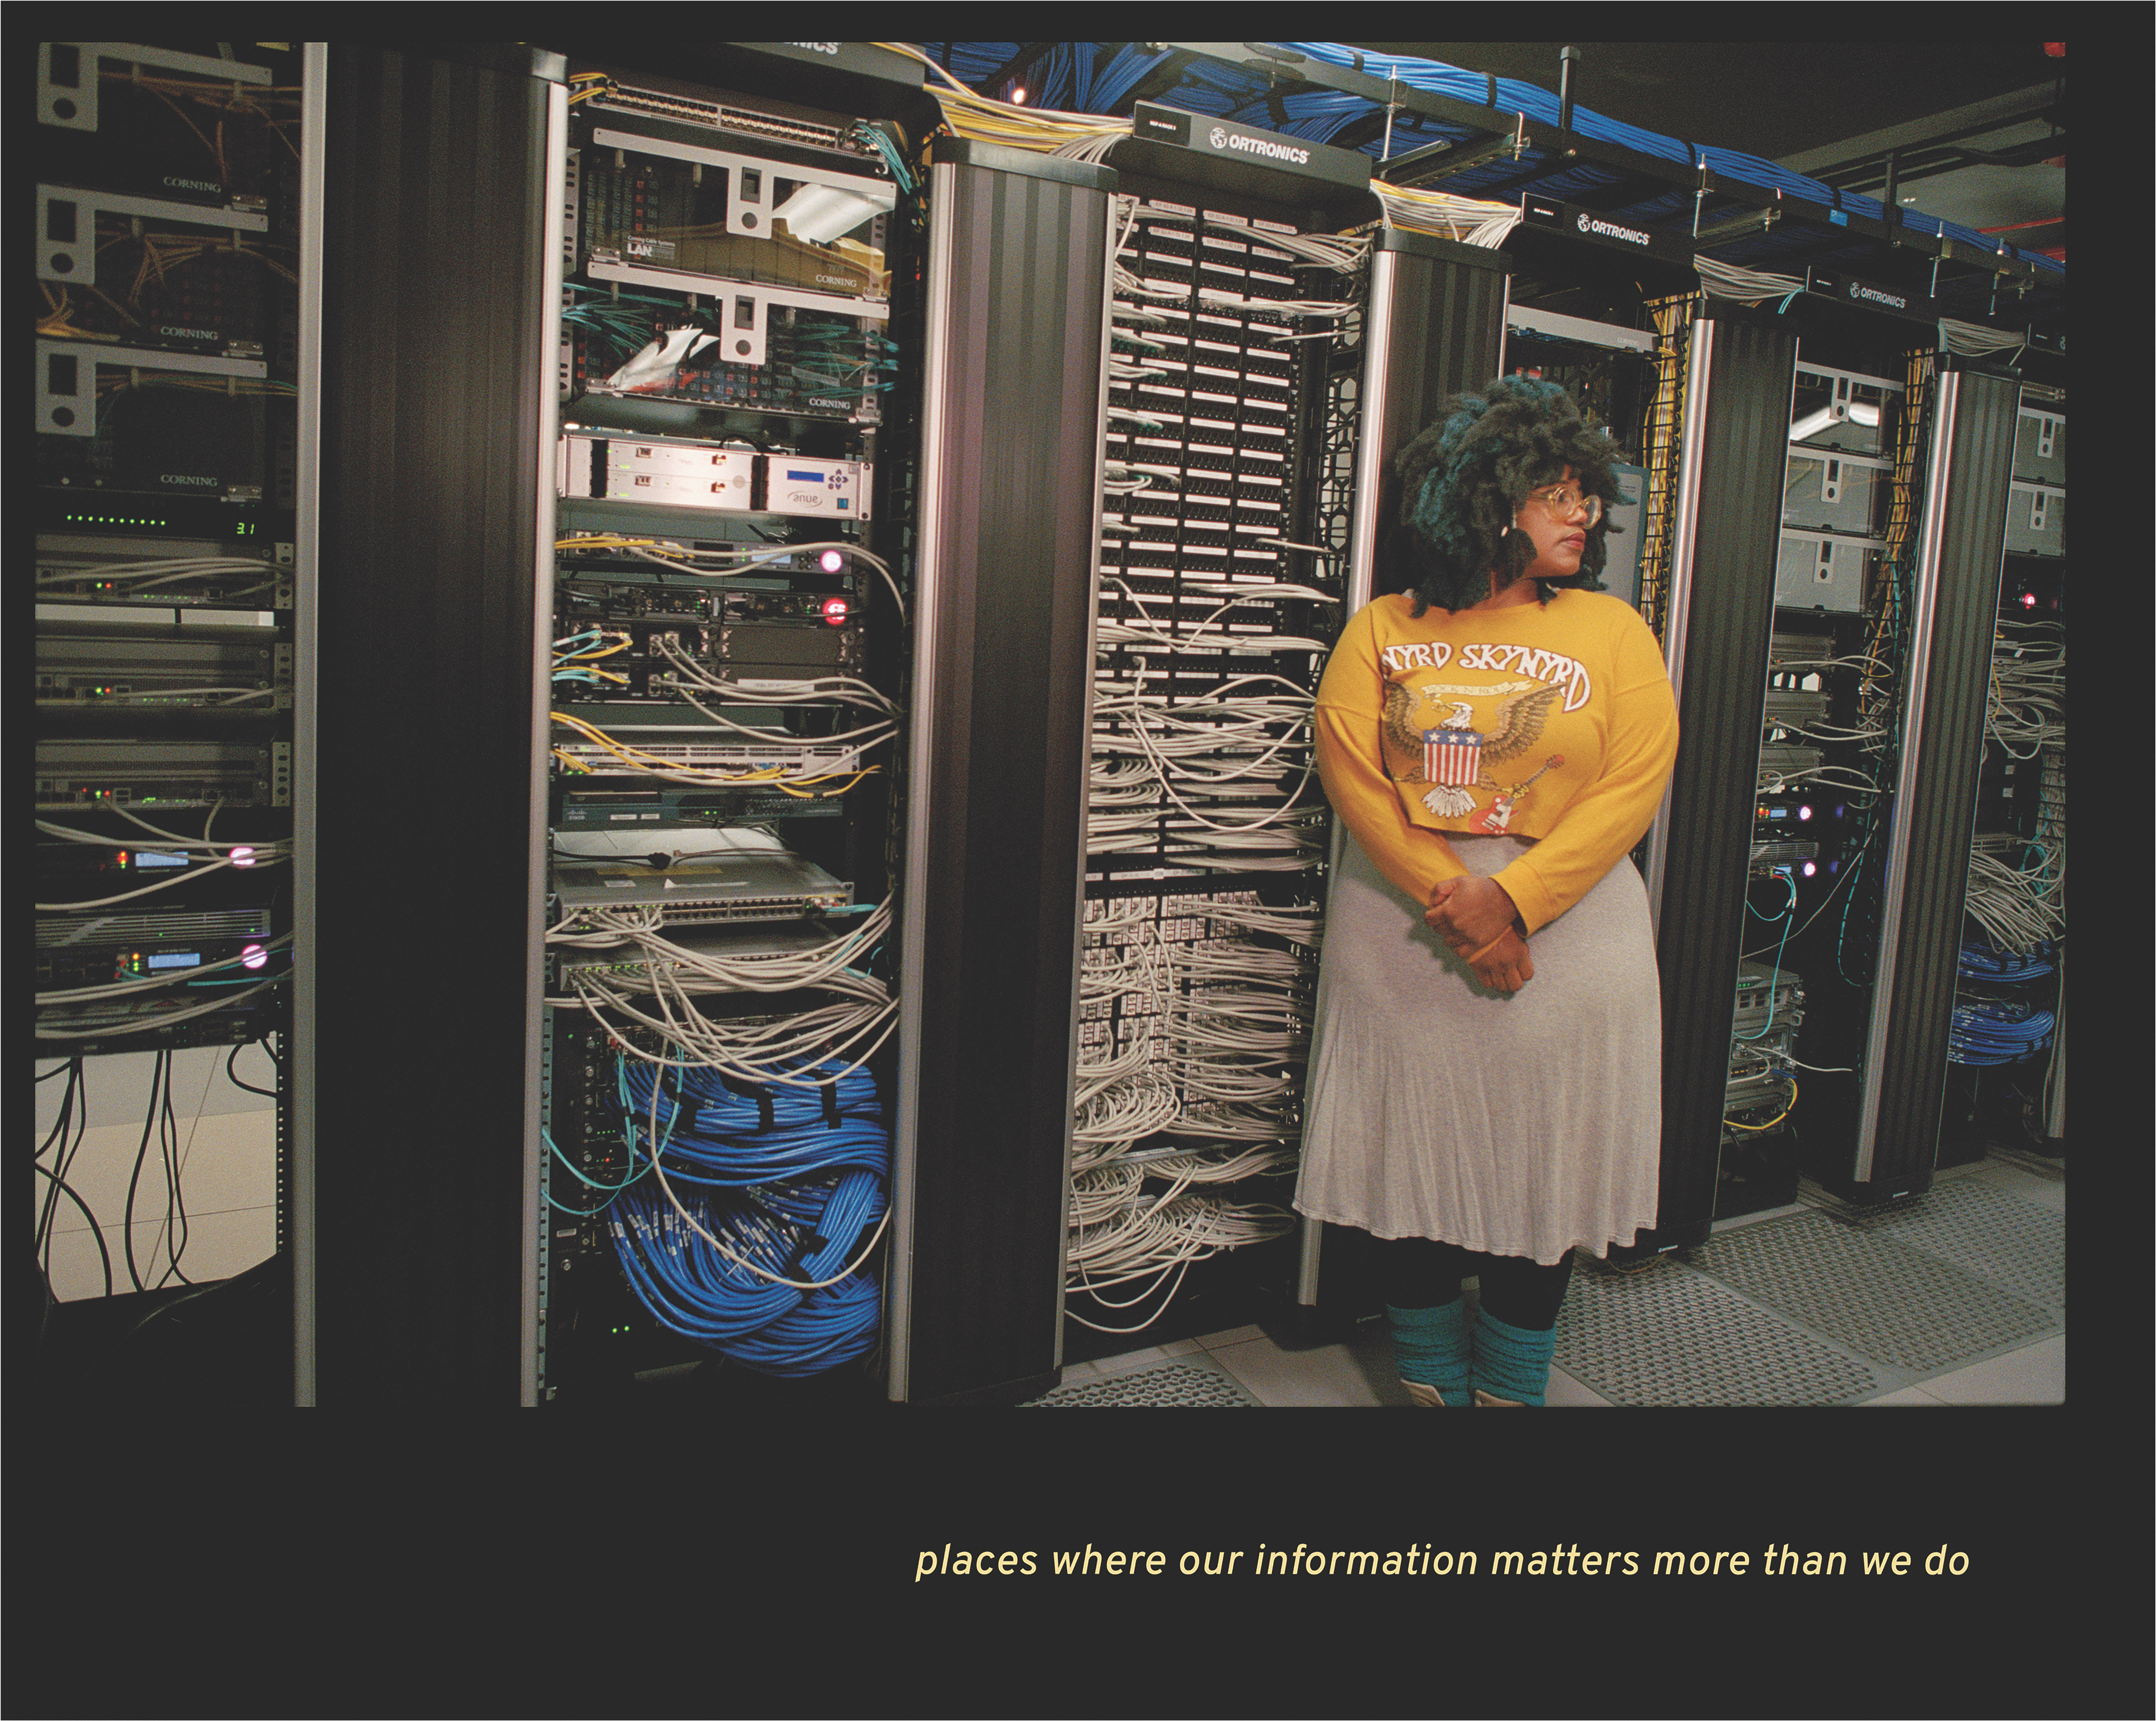 Black woman with black and blue hair stands in front of a large row servers with the caption “places where our information matters more than we do”